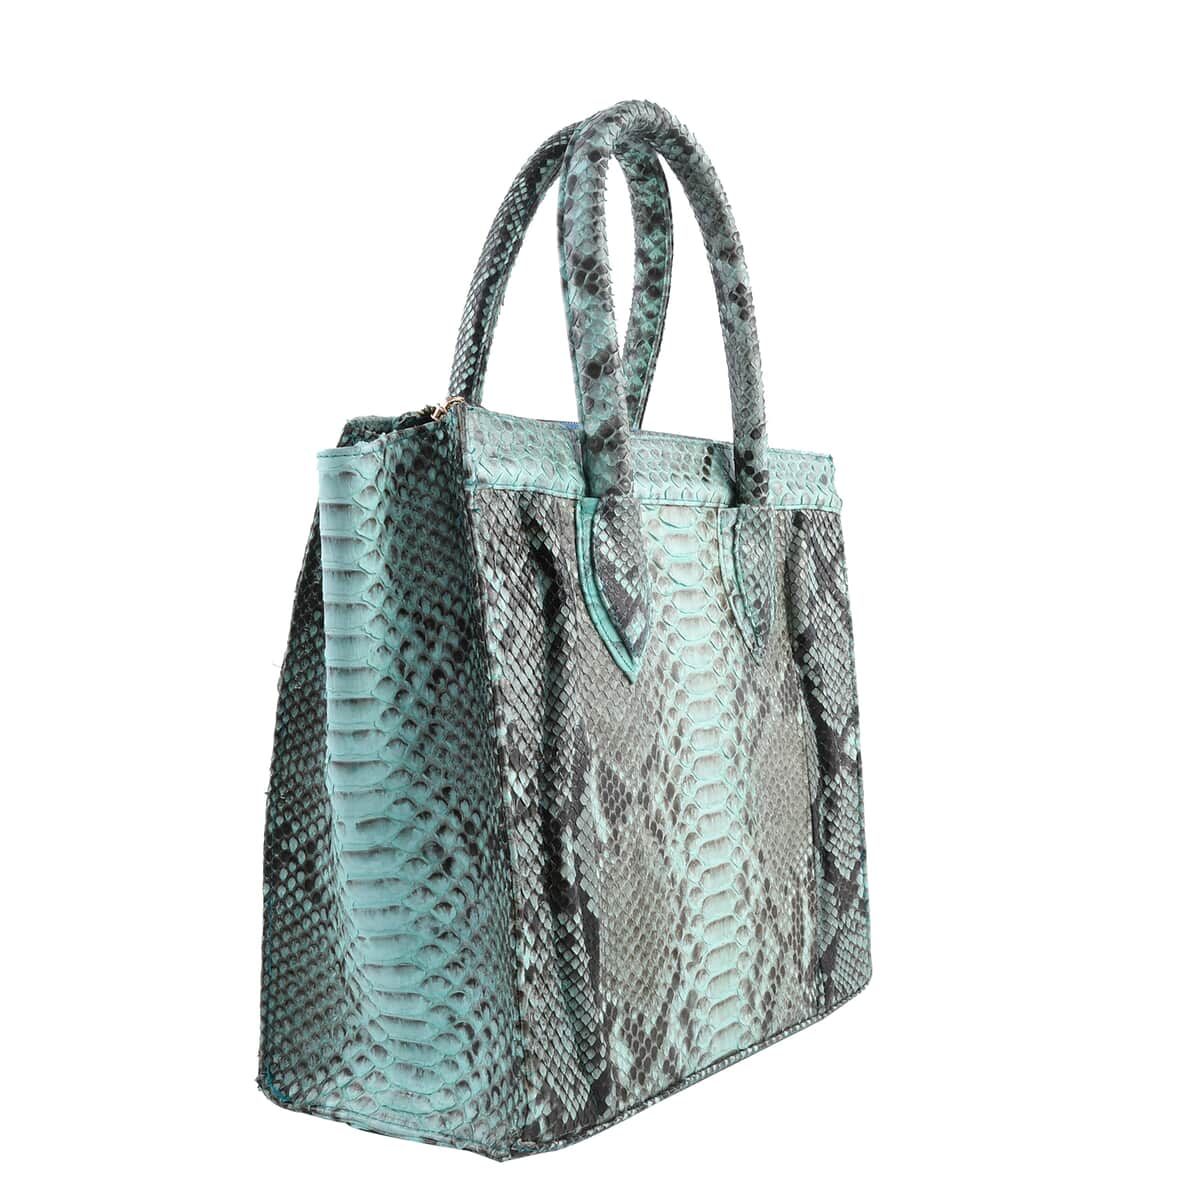 The Grand Pelle Handcrafted Turquoise Color Genuine Python Leather Tote Bag for Women with Wallet, Designer Tote Bags, Ladies Purse, Shoulder Handbags, Leather Wallet image number 3